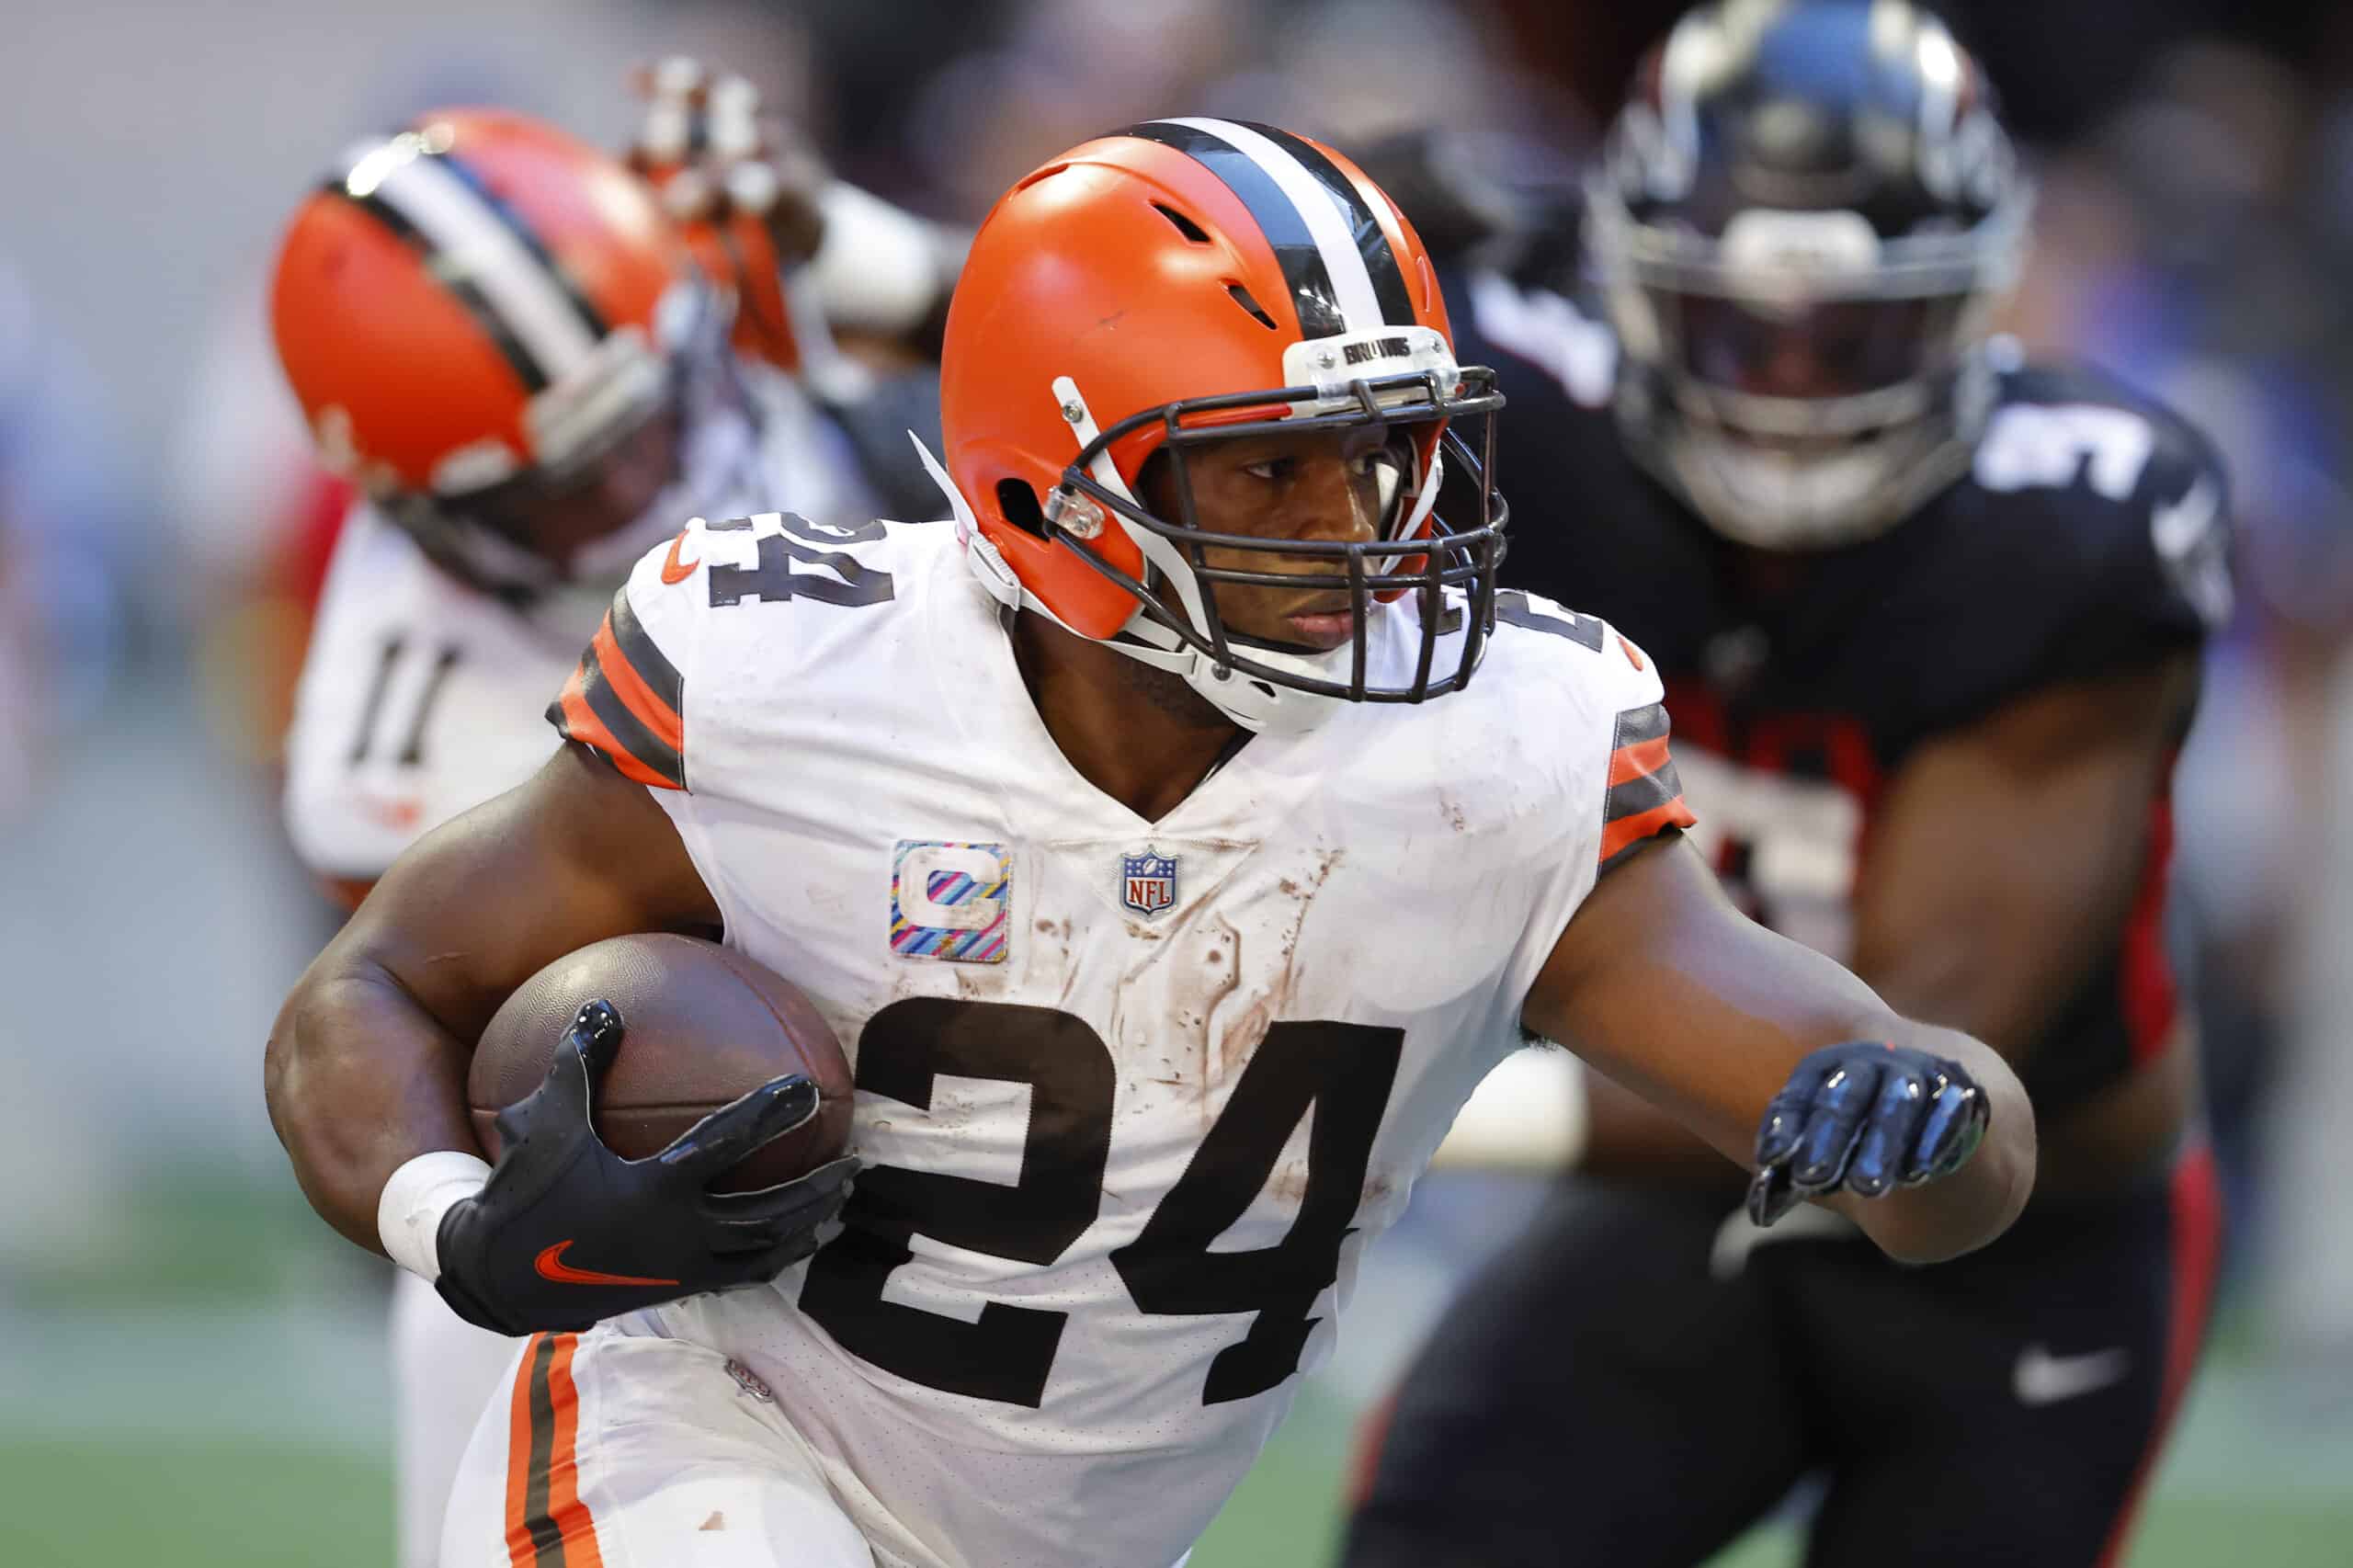 Nick Chubb #24 of the Cleveland Browns runs with the ball during the fourth quarter against the Atlanta Falcons at Mercedes-Benz Stadium on October 02, 2022 in Atlanta, Georgia.